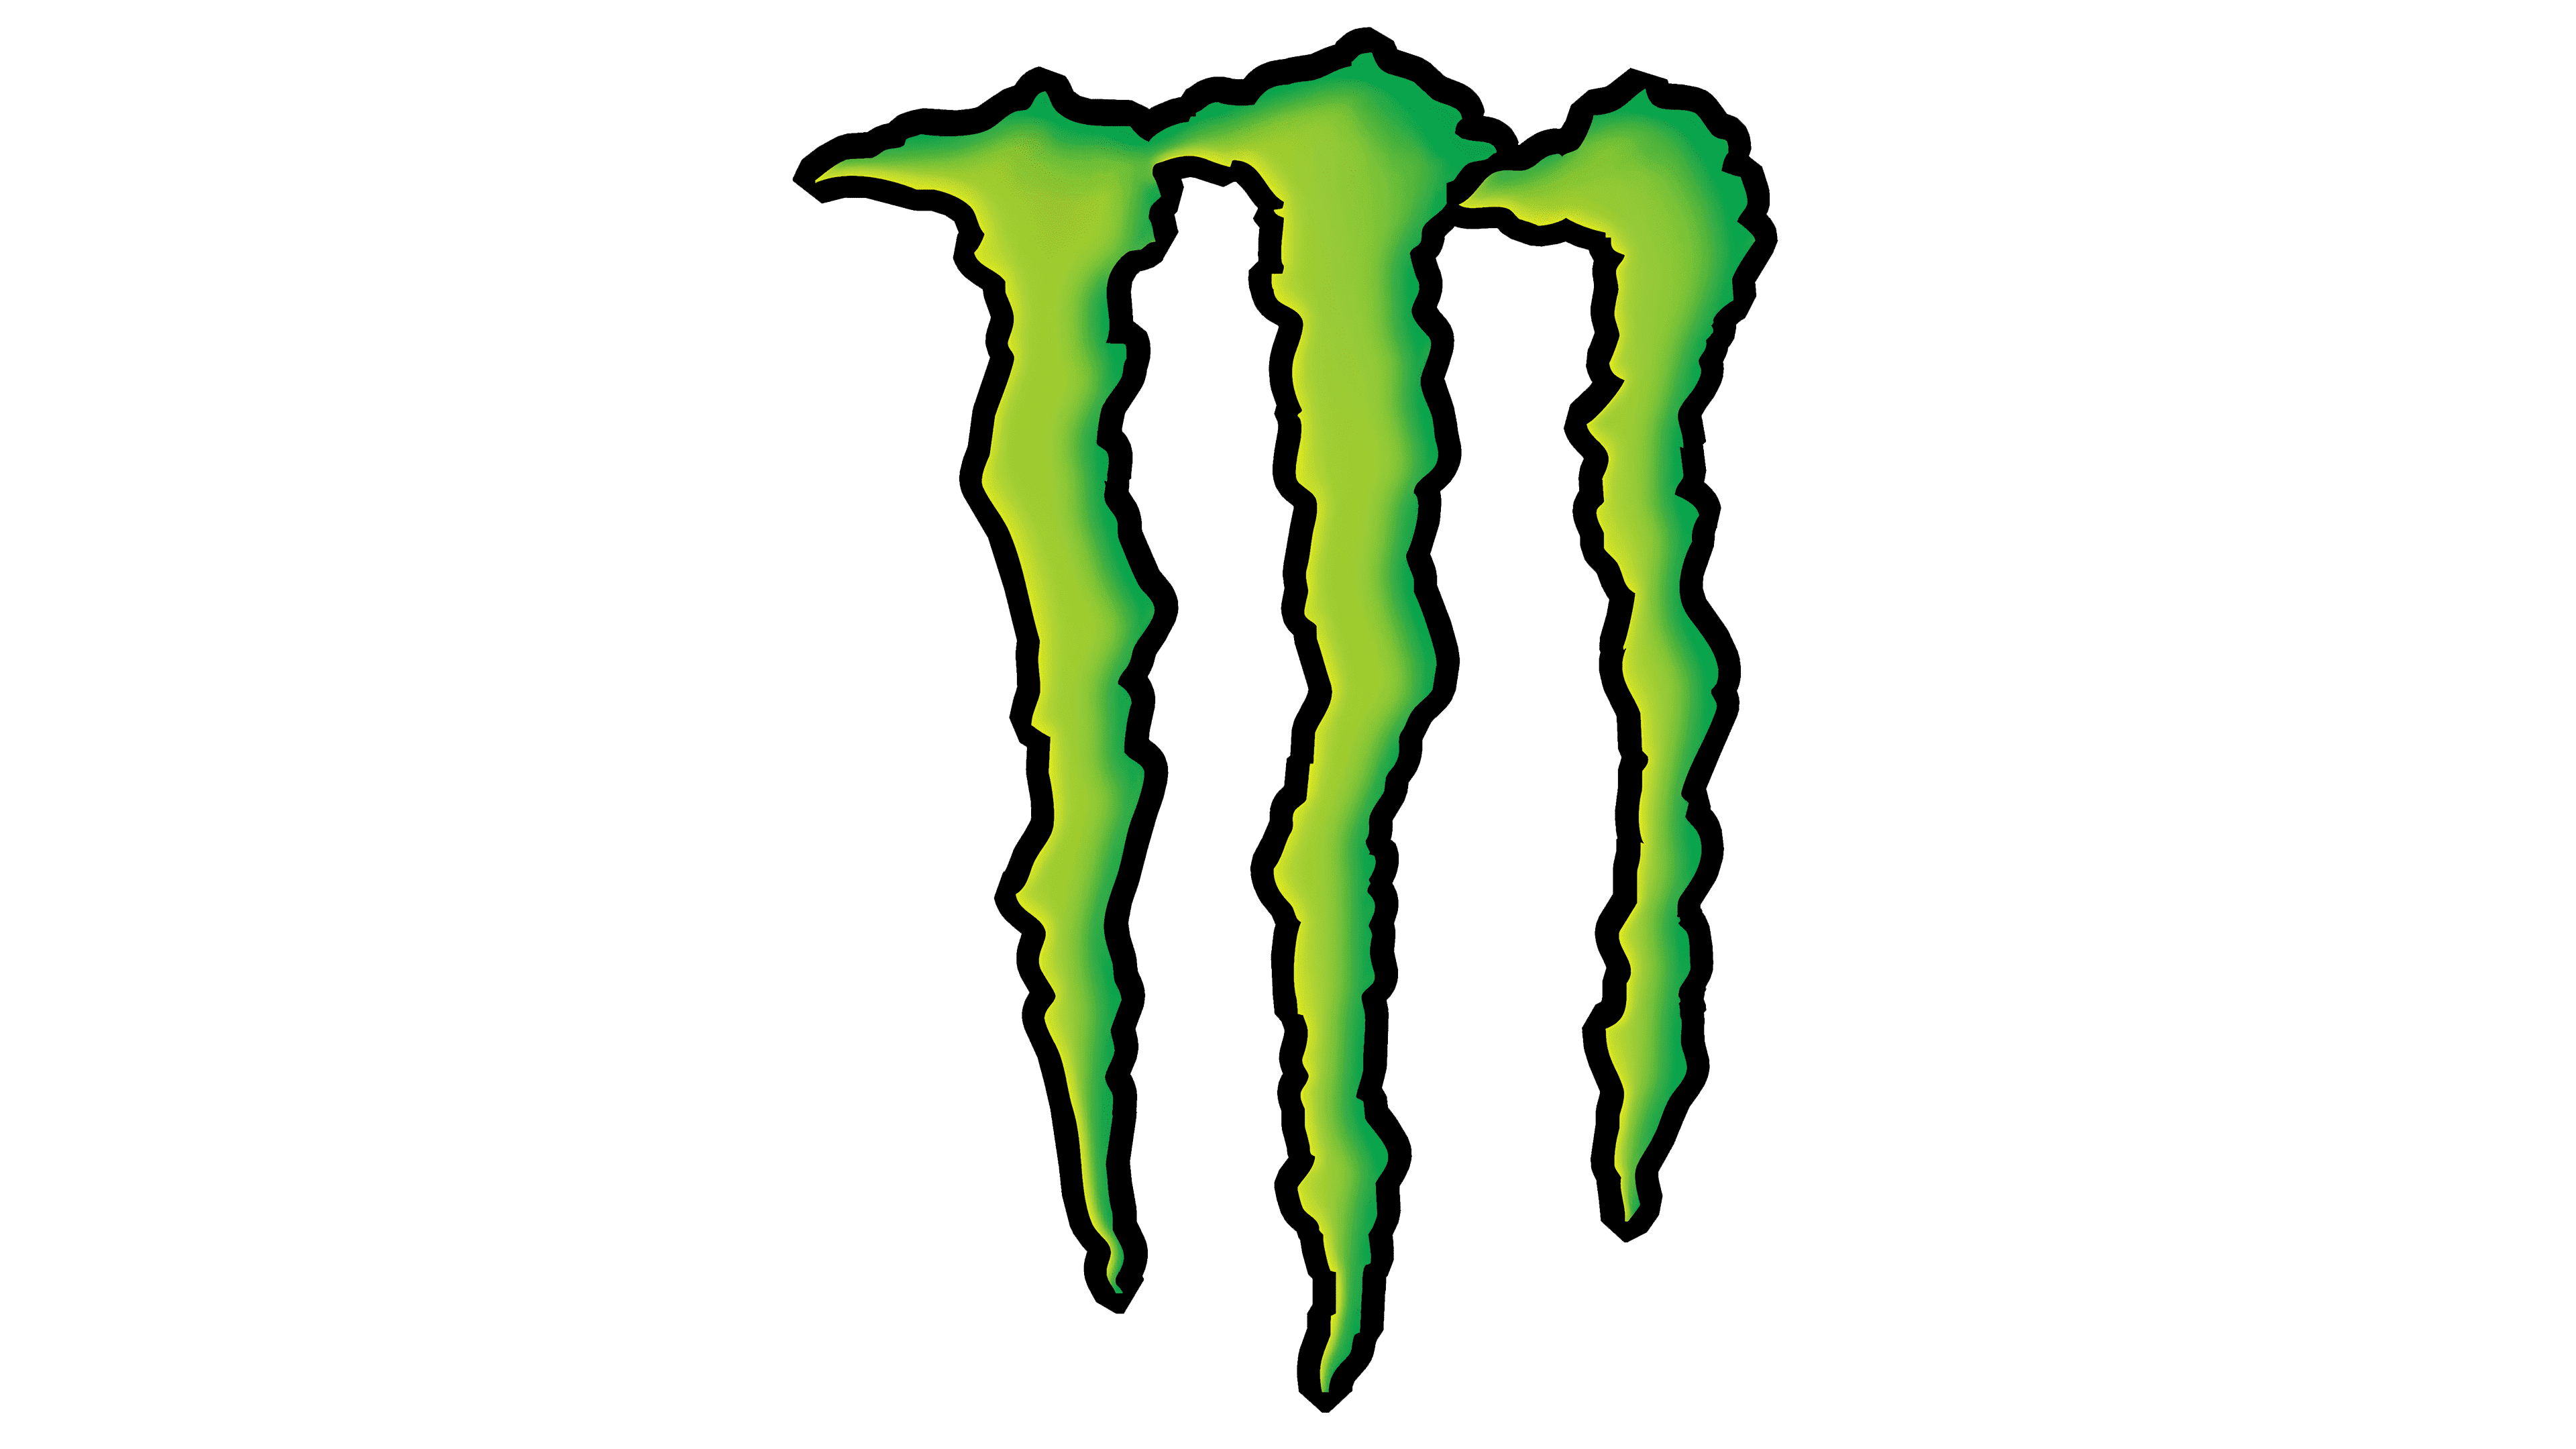 Monster Energy Logo, symbol, meaning, history, PNG, brand